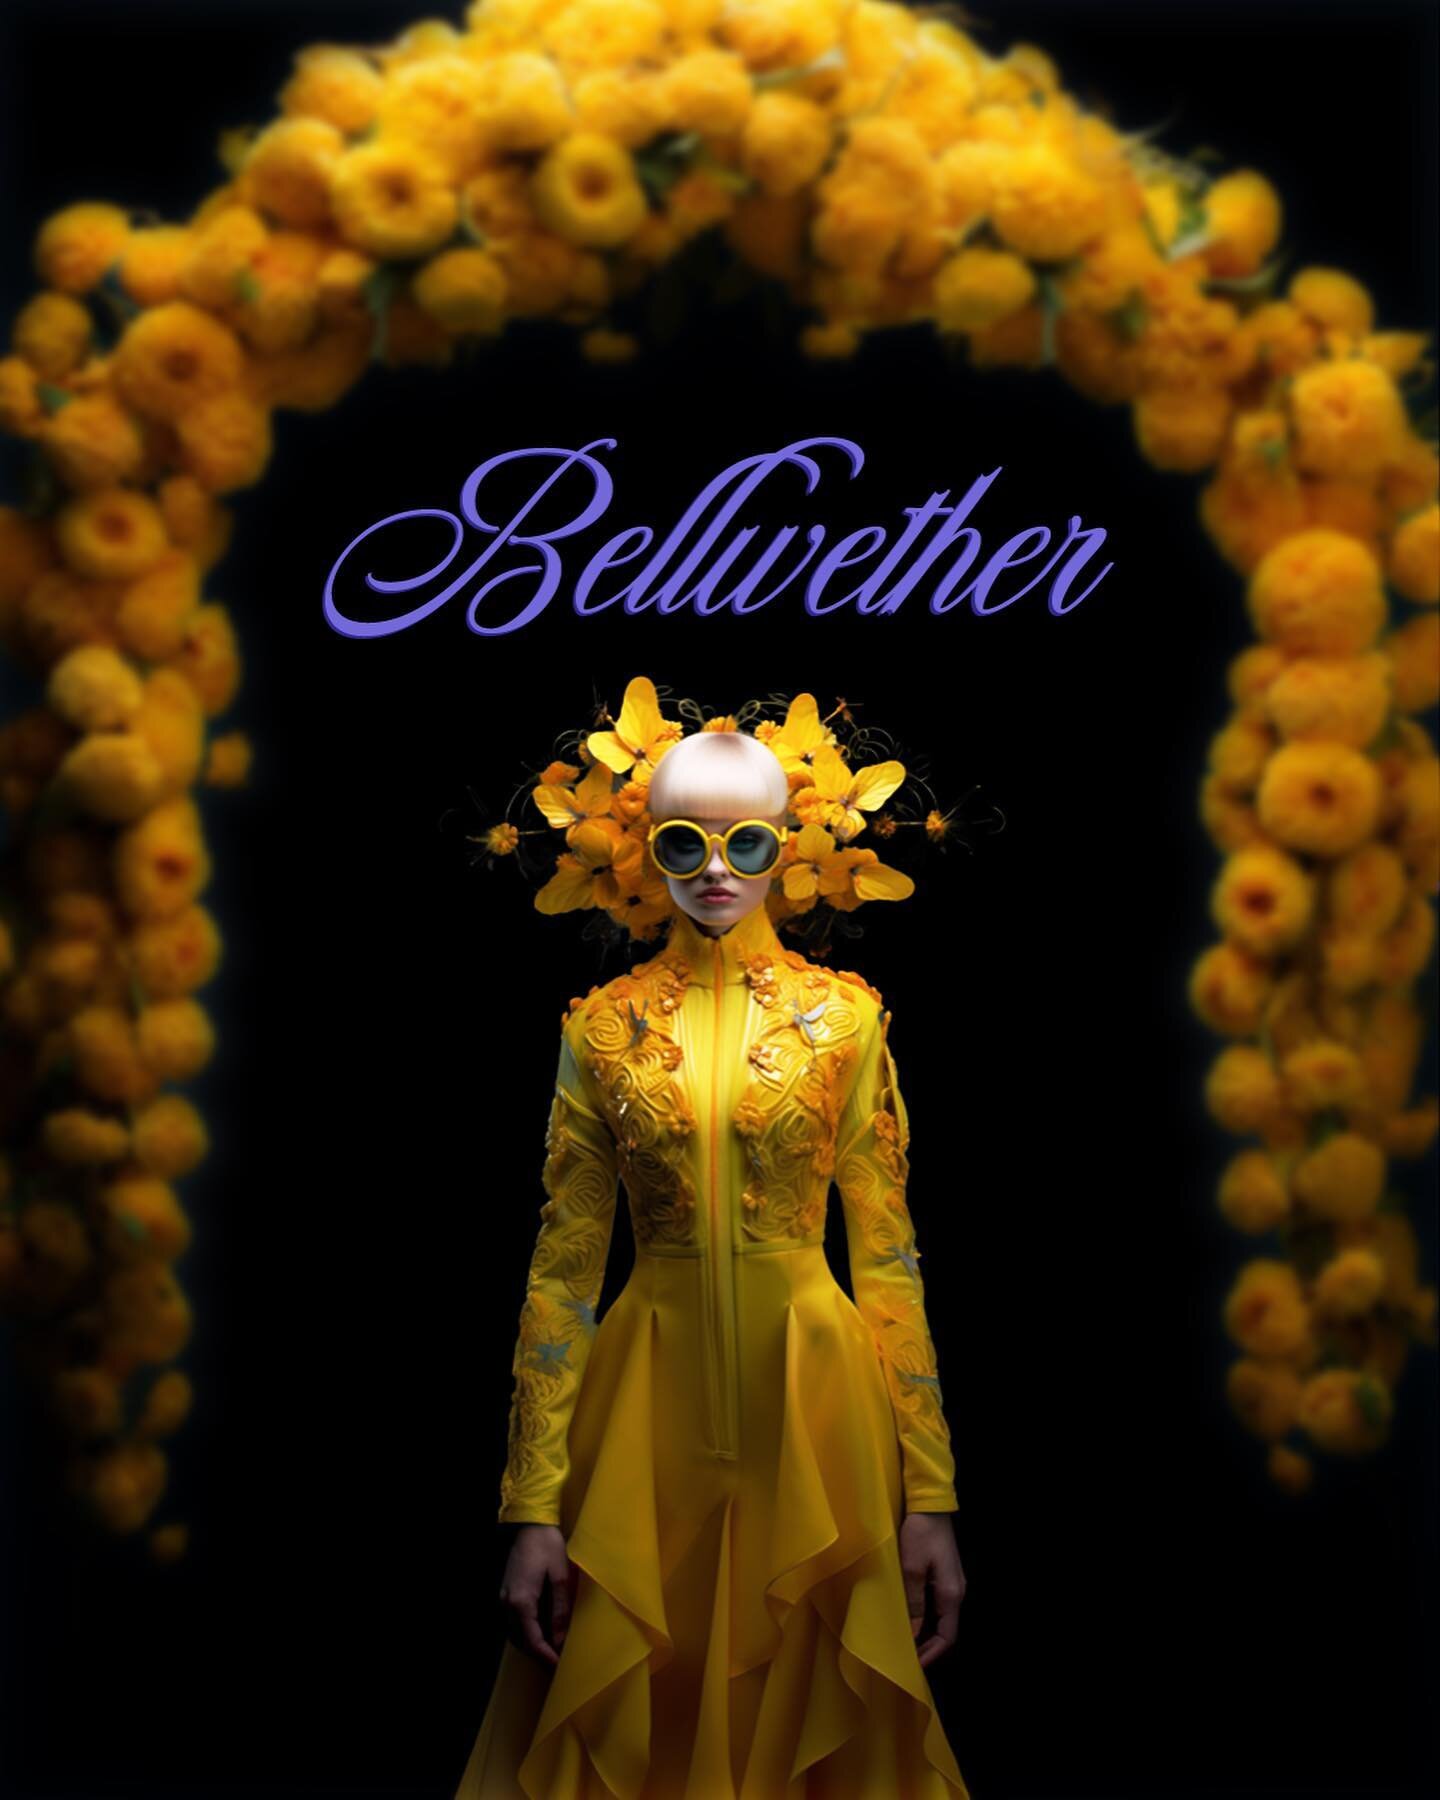 Bellwether: refers to someone or something that leads others or shows what will happen in the future&mdash;in other words, a leader or a trendsetter.

Goofed around with these, still trying my best to do a daily creative exercise with the word of the